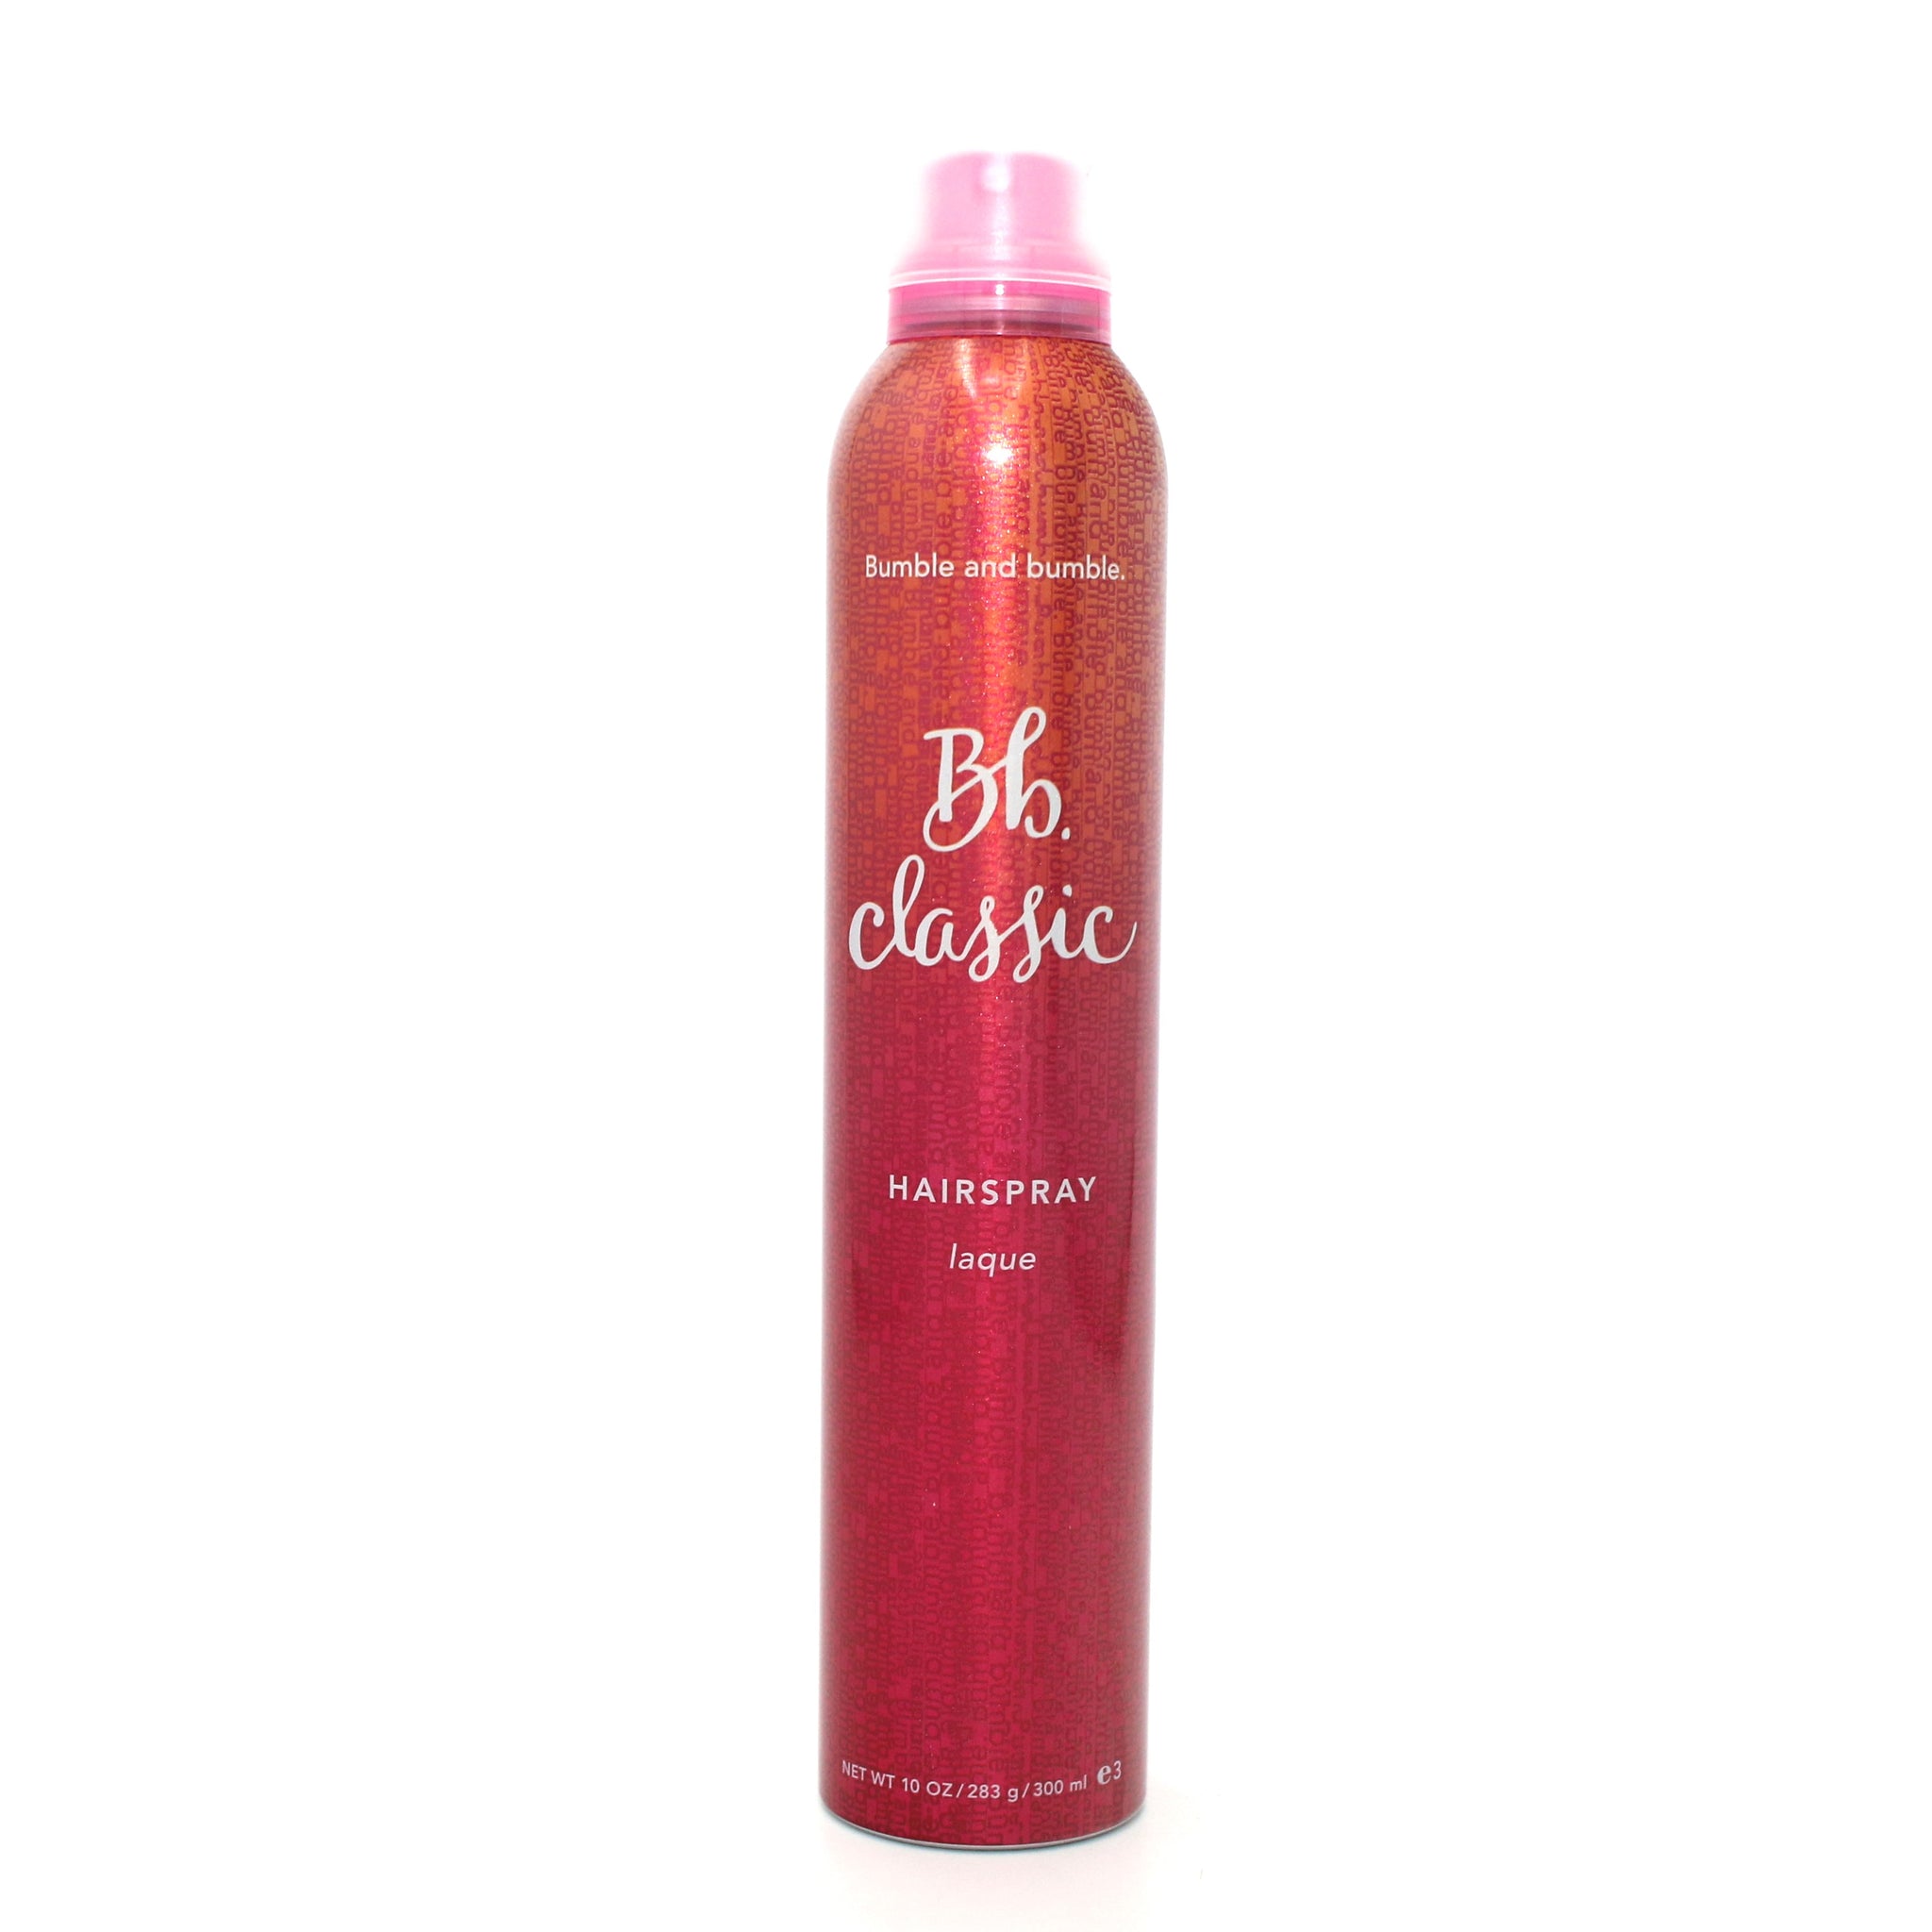 Bumble and Bumble Bb Classic Hairspray 10 oz